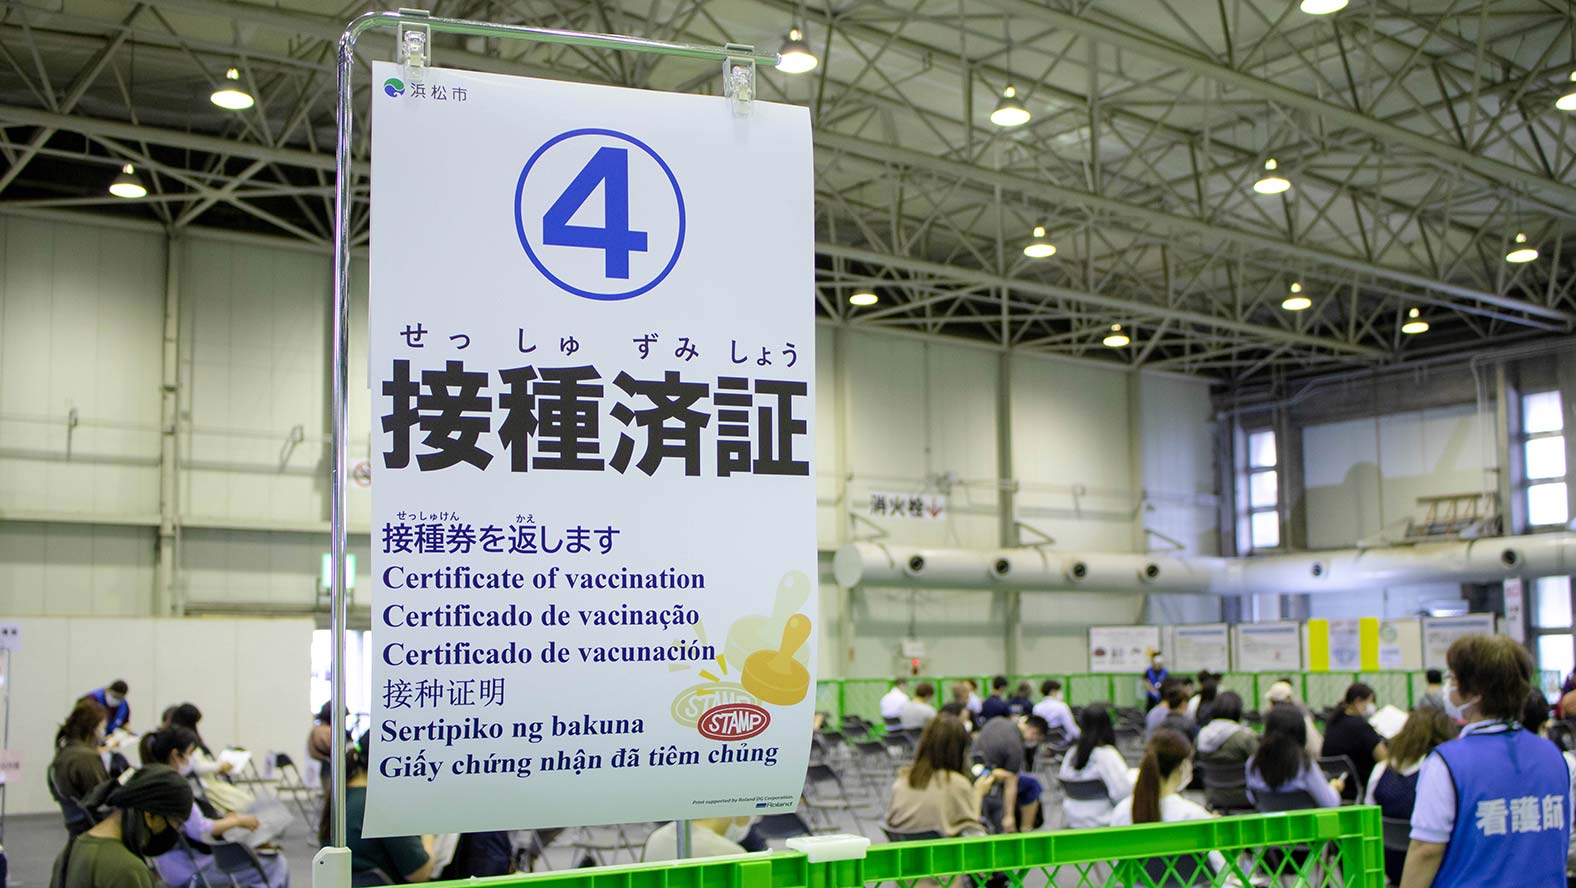 Mass vaccination center at the Hamamatsu City Synthesis and Industry Exhibition Pavilion